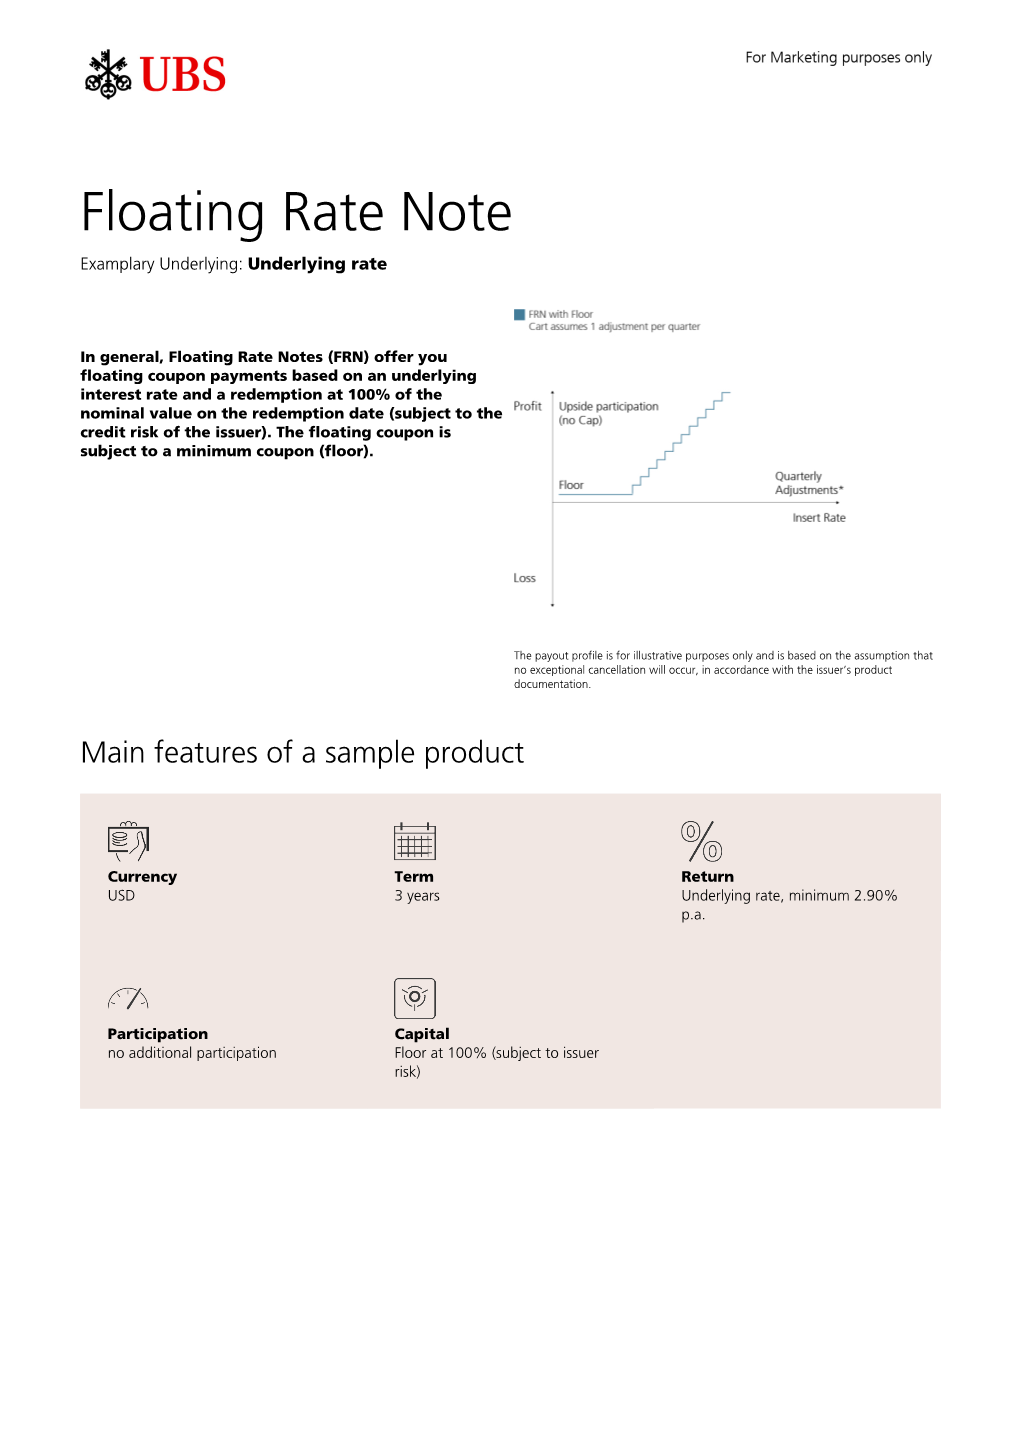 Floating Rate Note Examplary Underlying: Underlying Rate